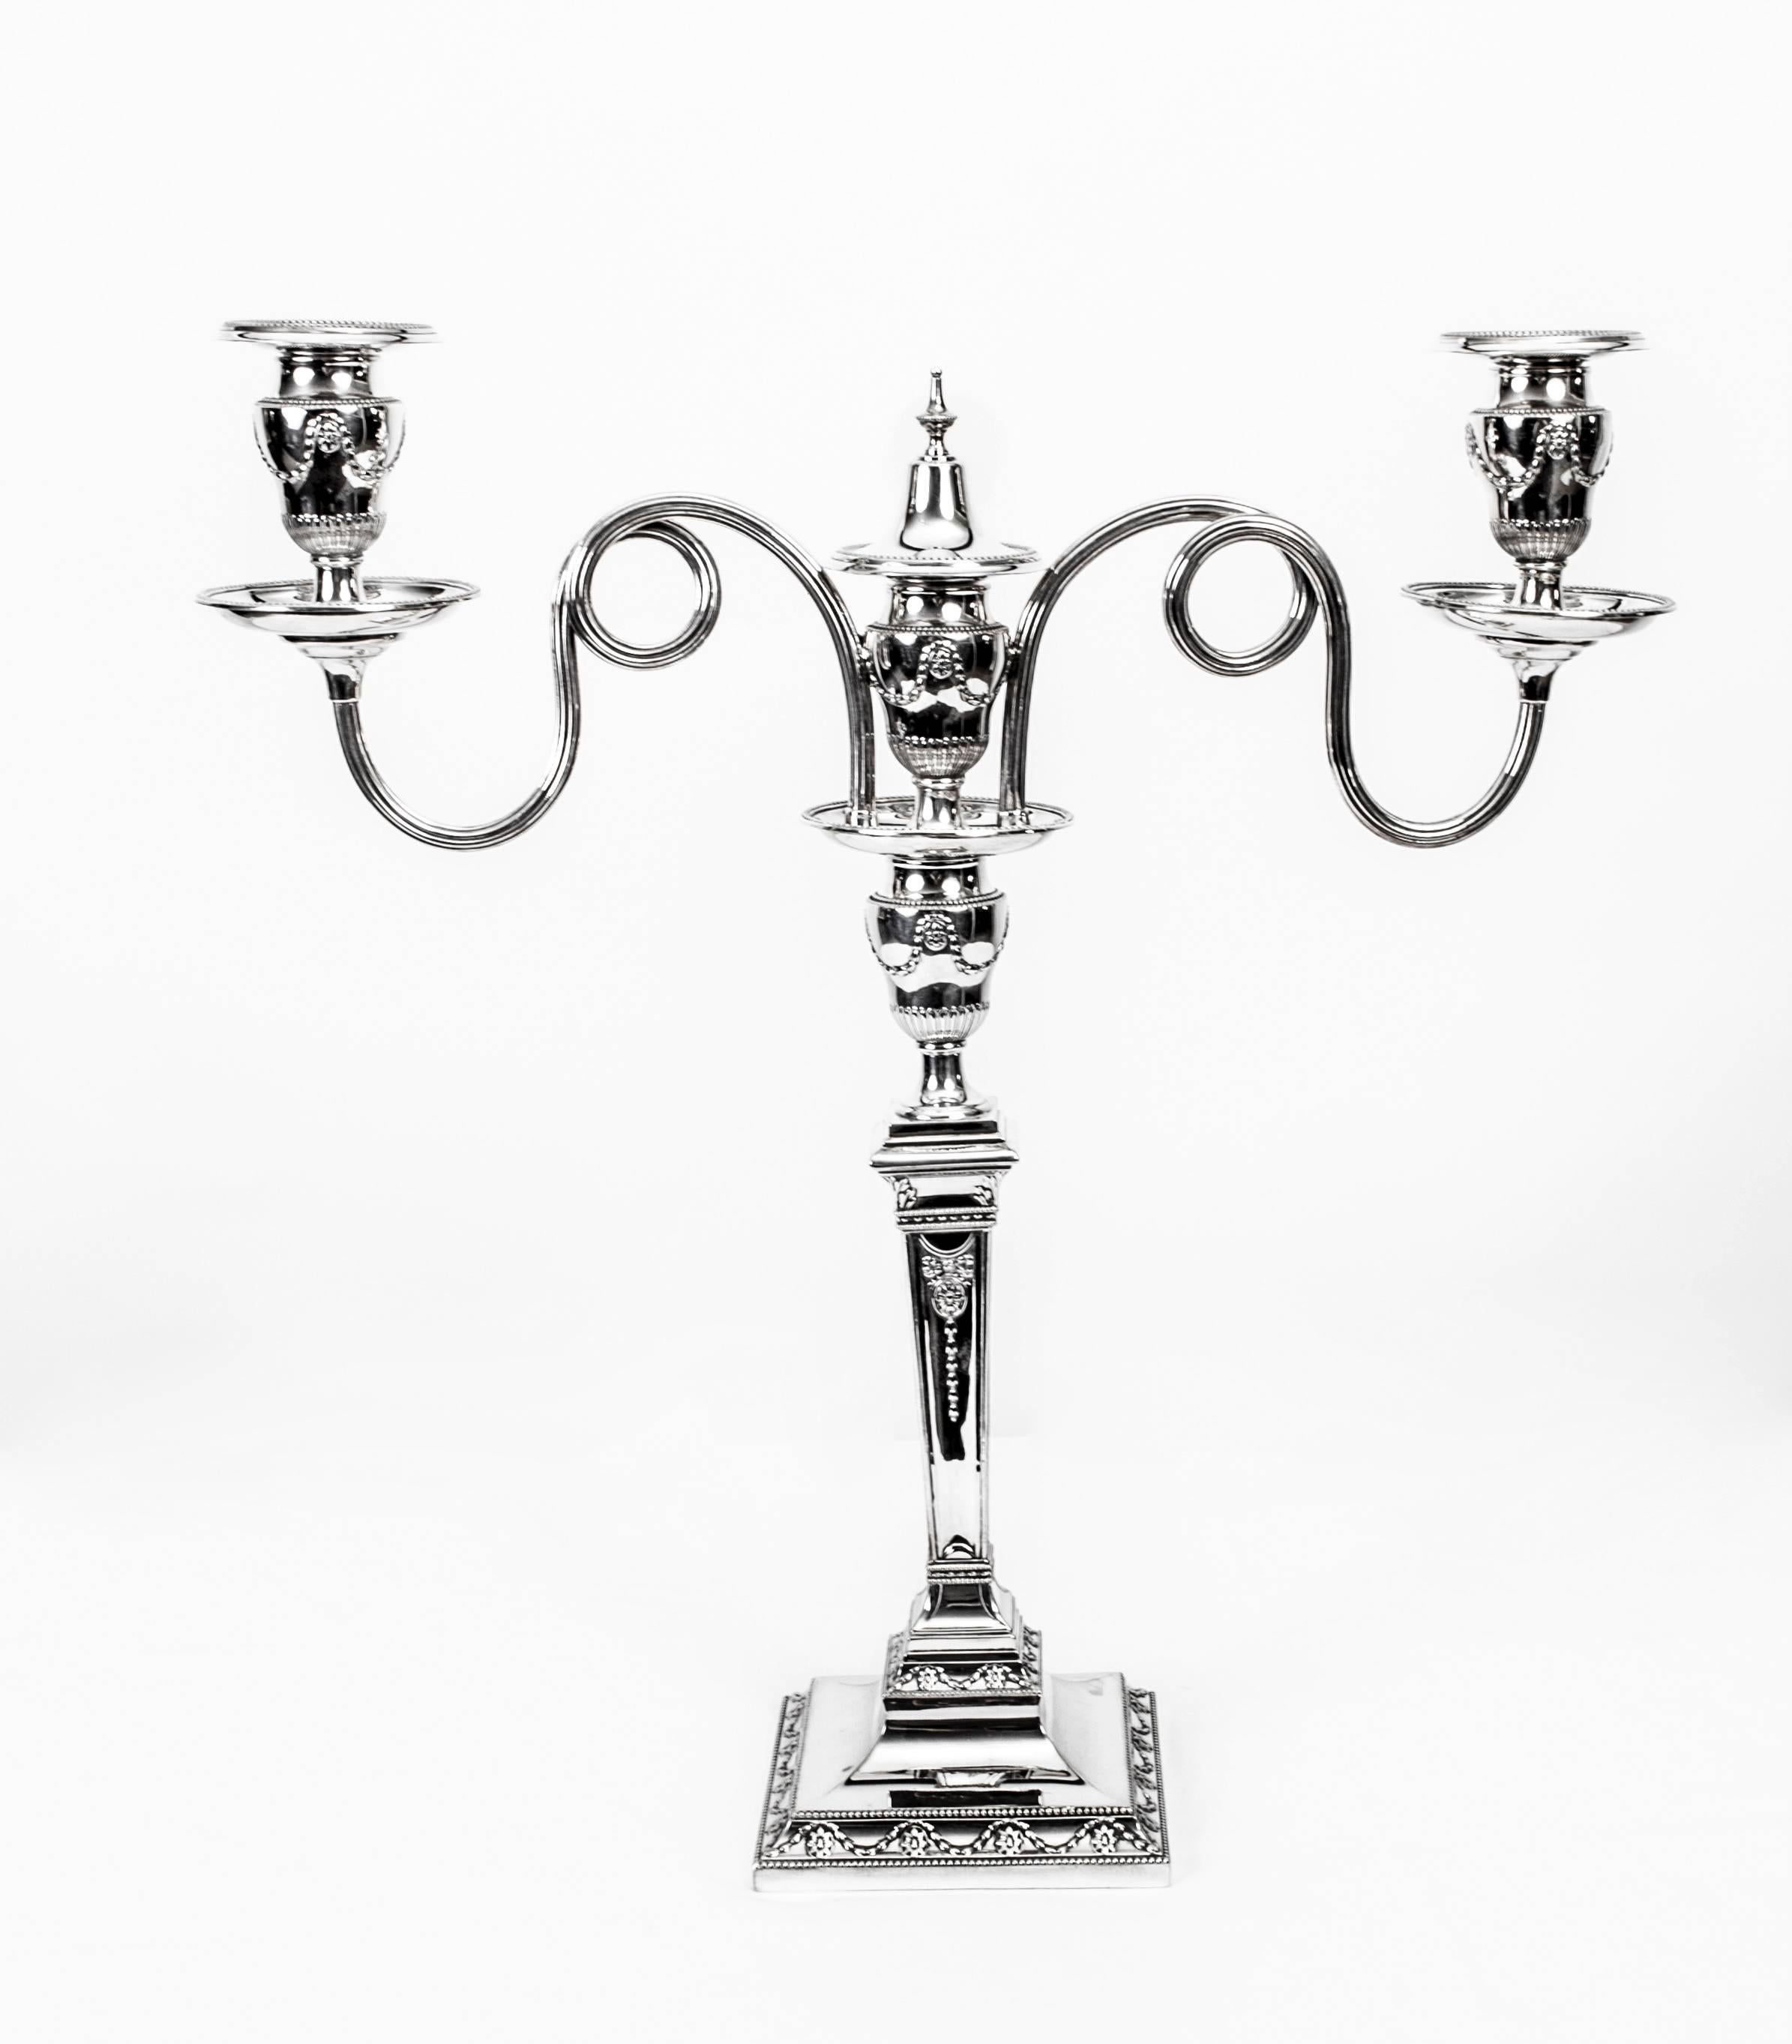 This is a stunning pair of antique Victorian Adam style silver plated, two-light, table candelabra bearing the maker's mark of the renowned silversmith Hawksworth, Eyre & Co, circa 1860 in date. This mark was used by Hawksworth Eyre from